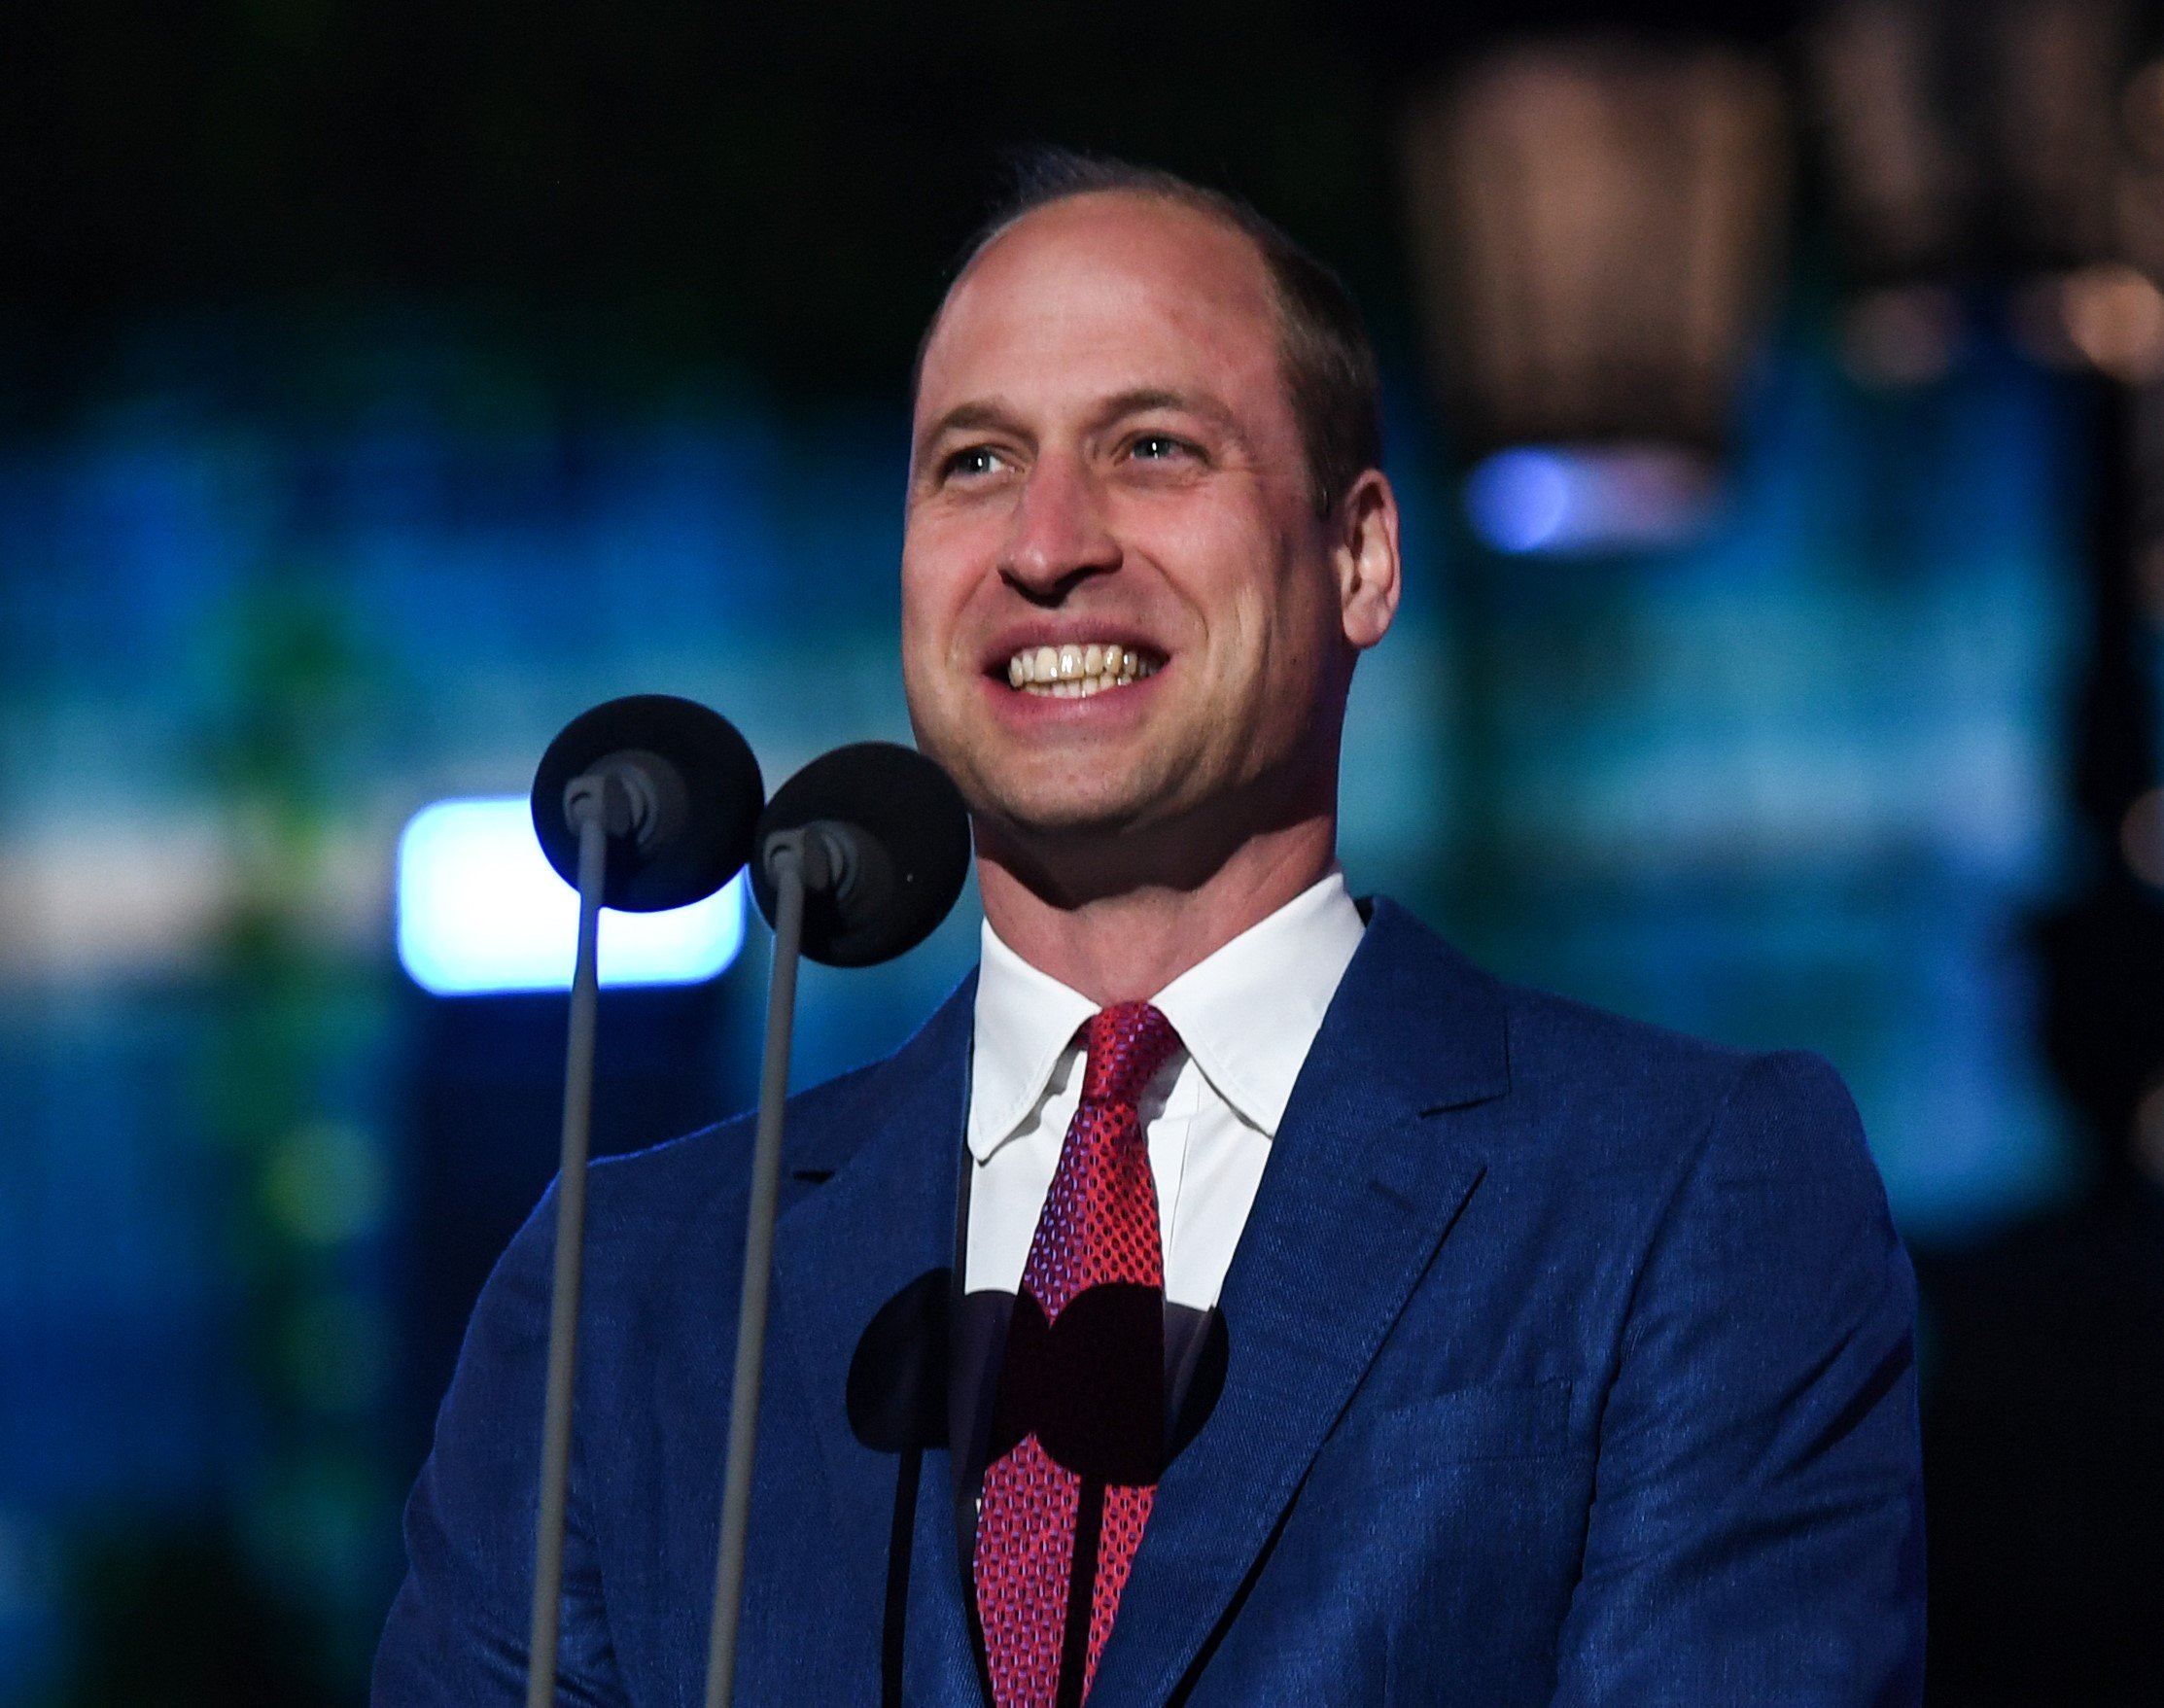 Prince William, whose had some awkward moments over the years, speaking during Platinum Party at the Palace as part of the Queen's Jubilee